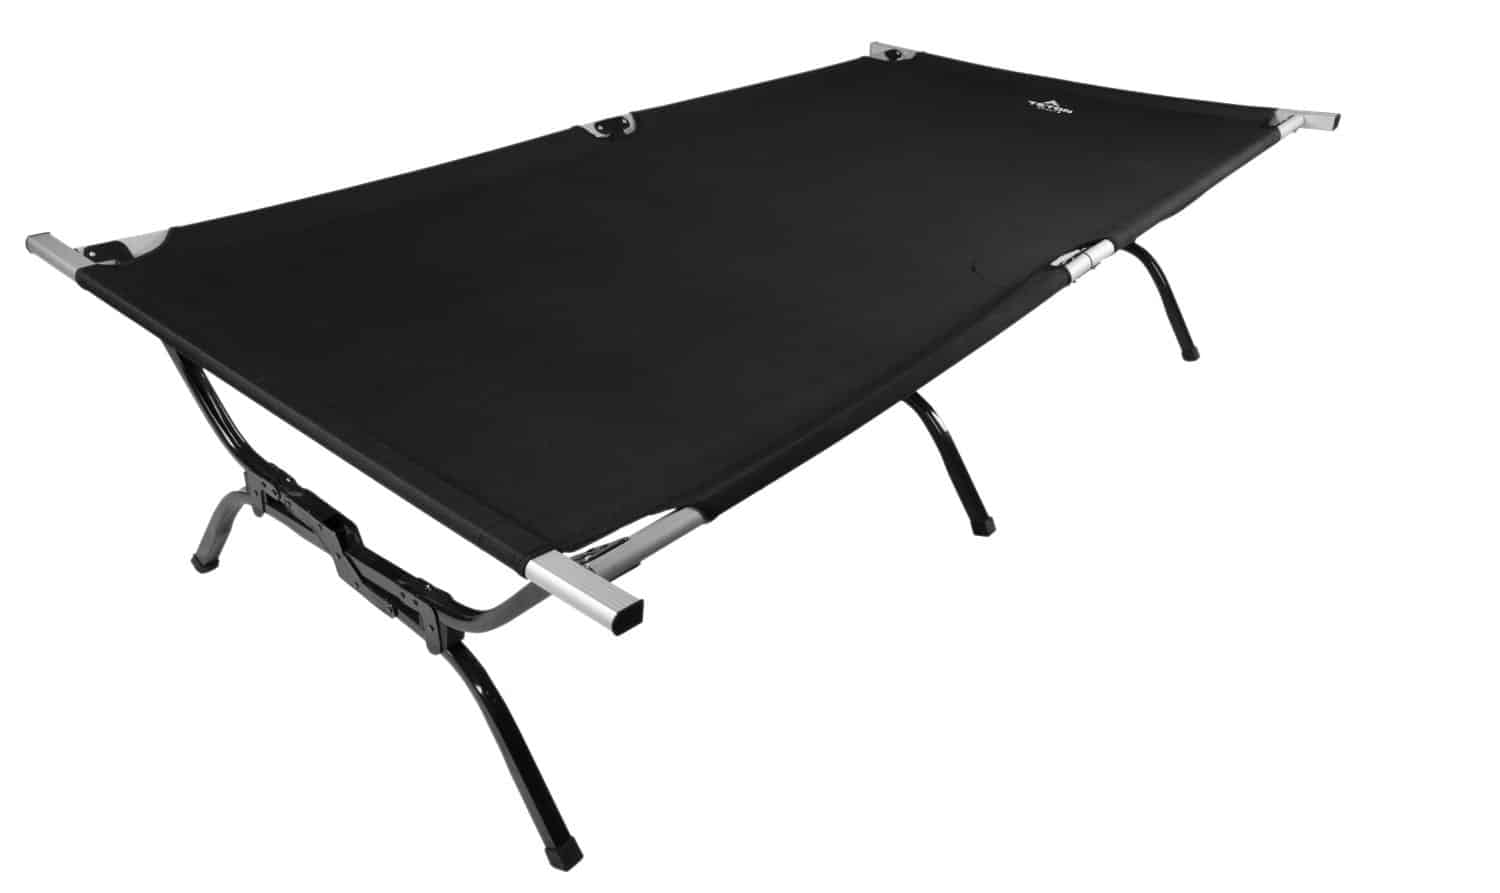 JS REVIEWS AND GIVEAWAYS: Teton Sports Outfitter XXL Camping Cot Giveaway